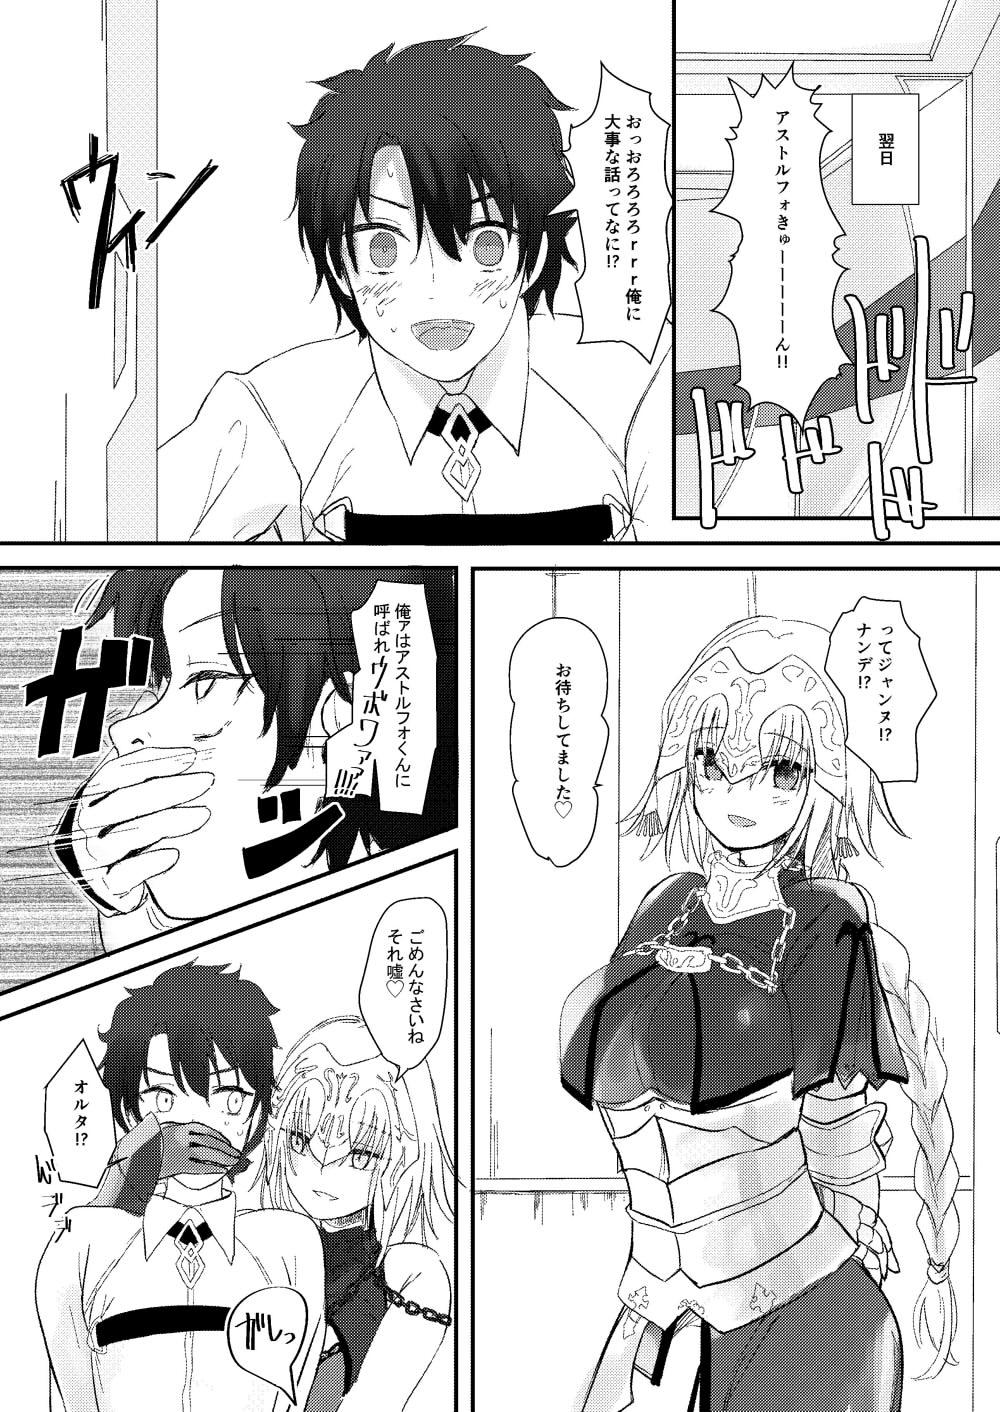 Deutsch Jeanne to Boku to Jeanne - Fate grand order Messy - Page 4